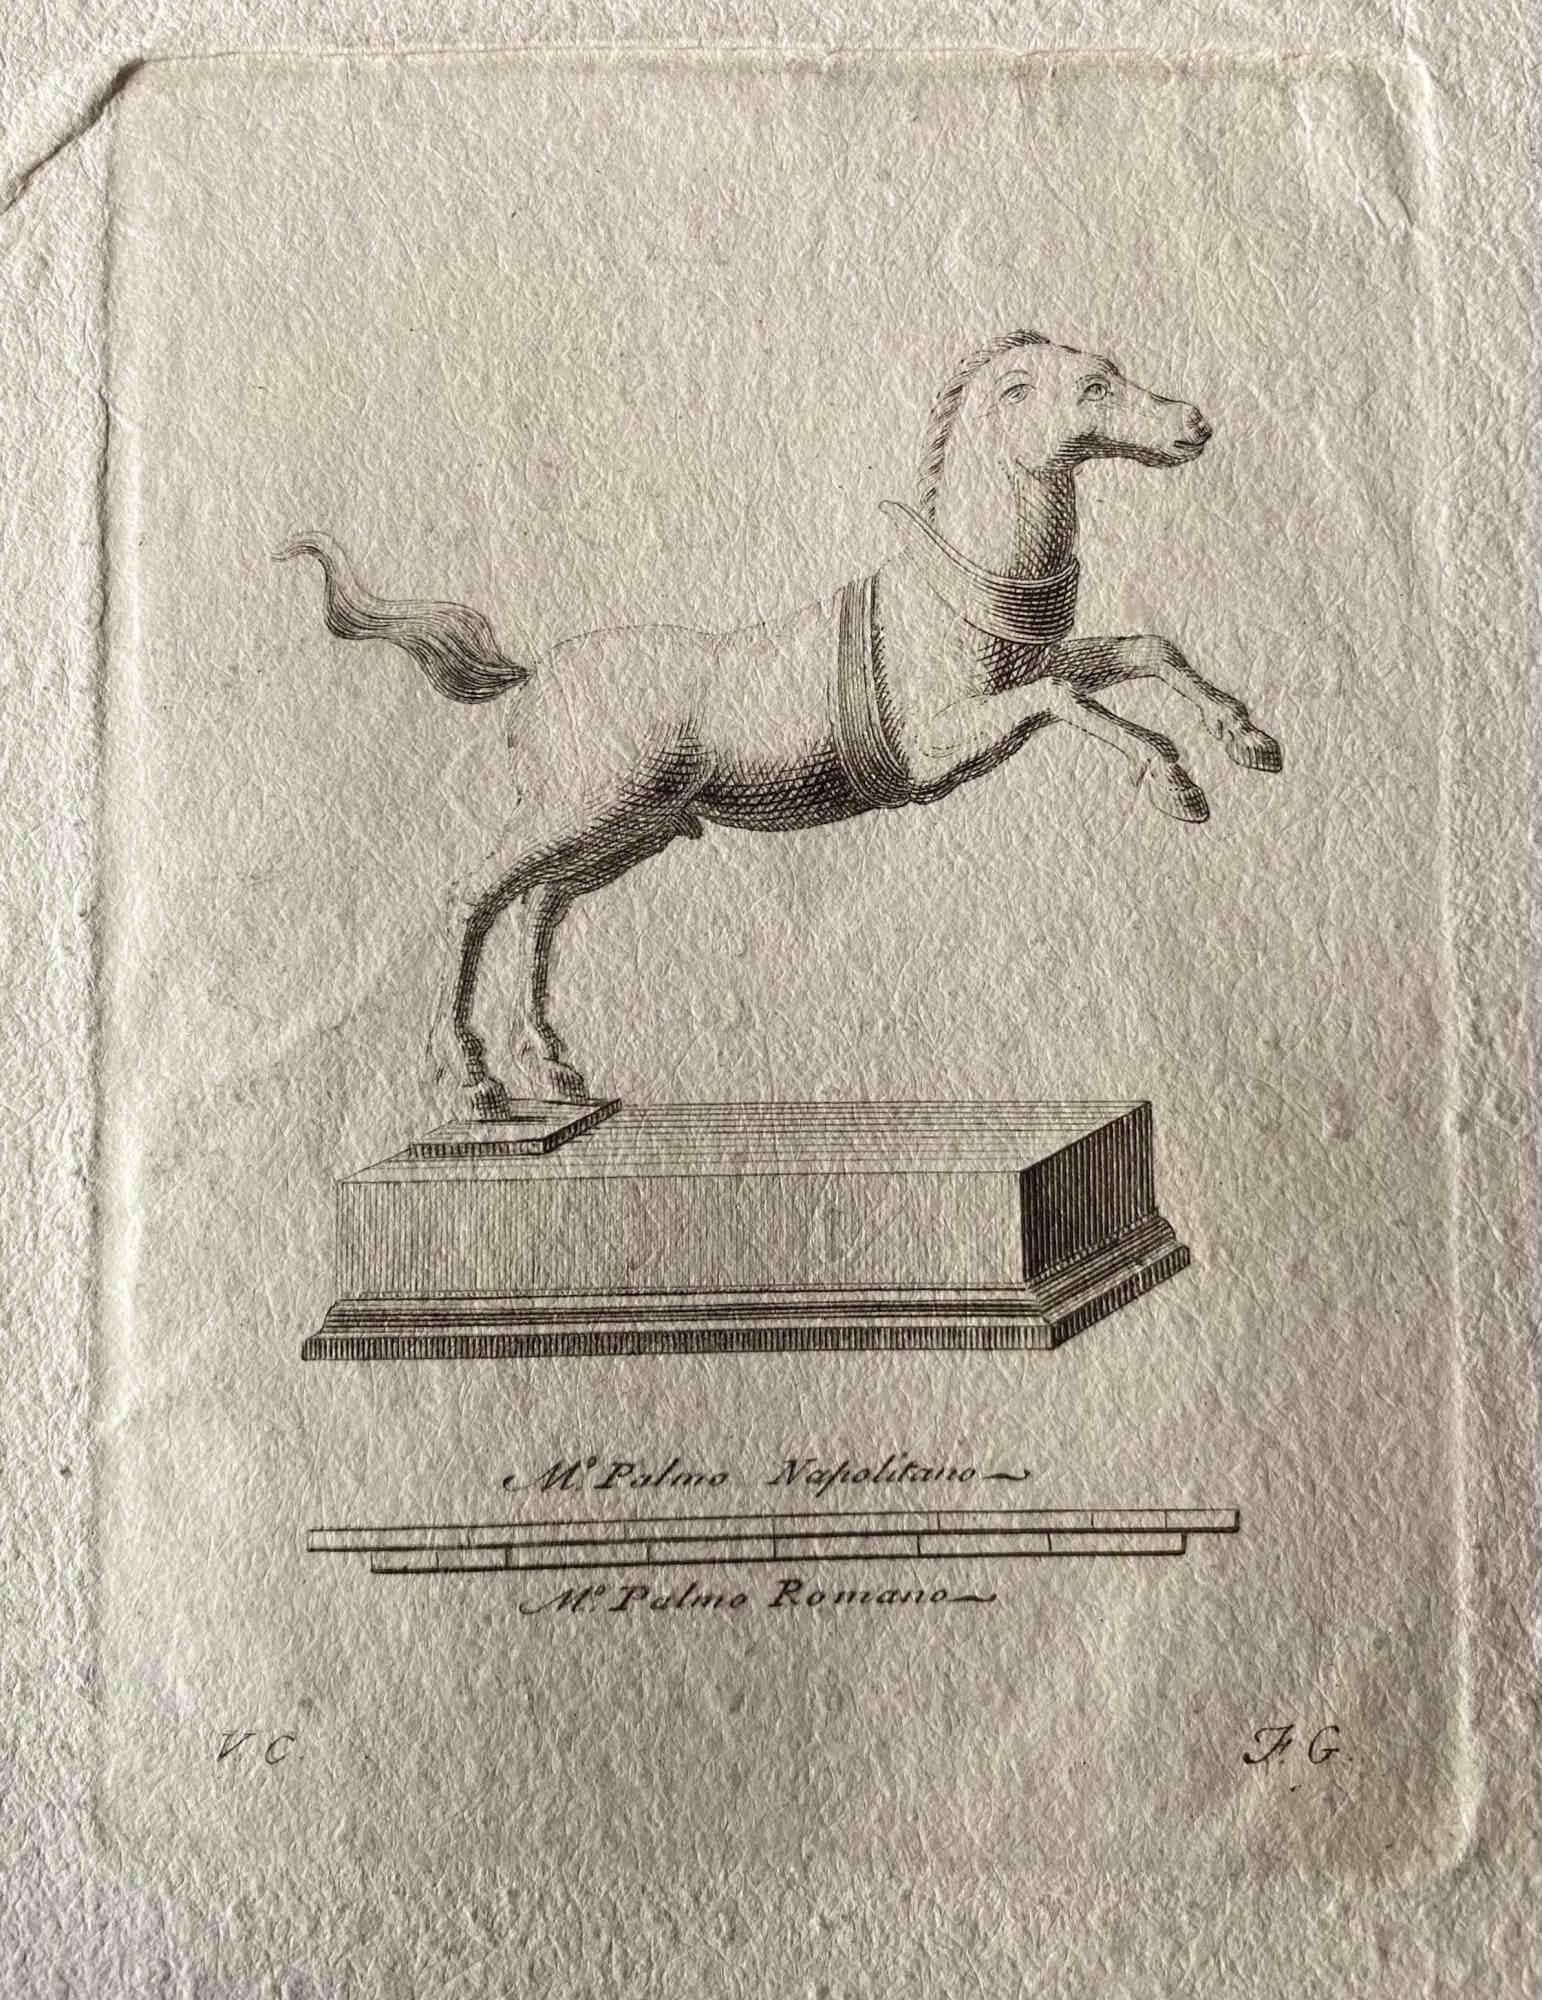 Animal Figures from Ancient Rome - Original Etching by Various Masters - 1750s